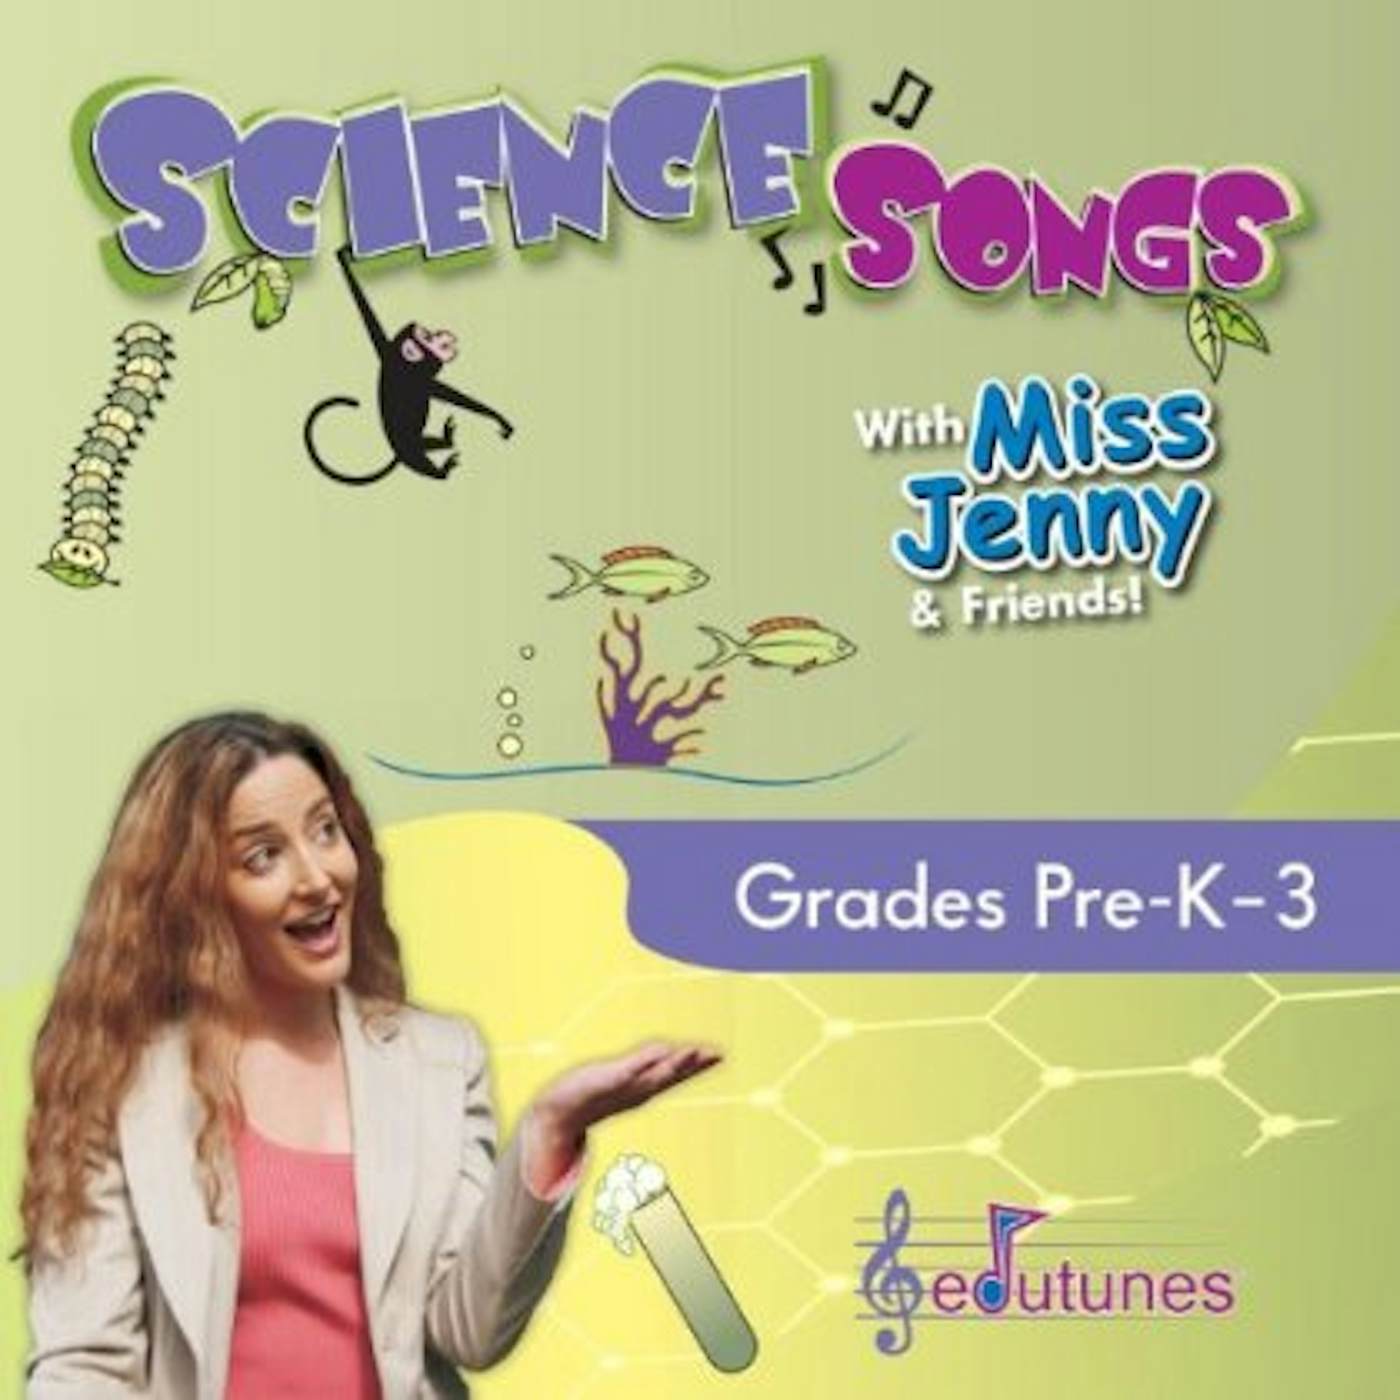 SCIENCE SONGS WITH MISS JENNY & FRIENDS CD